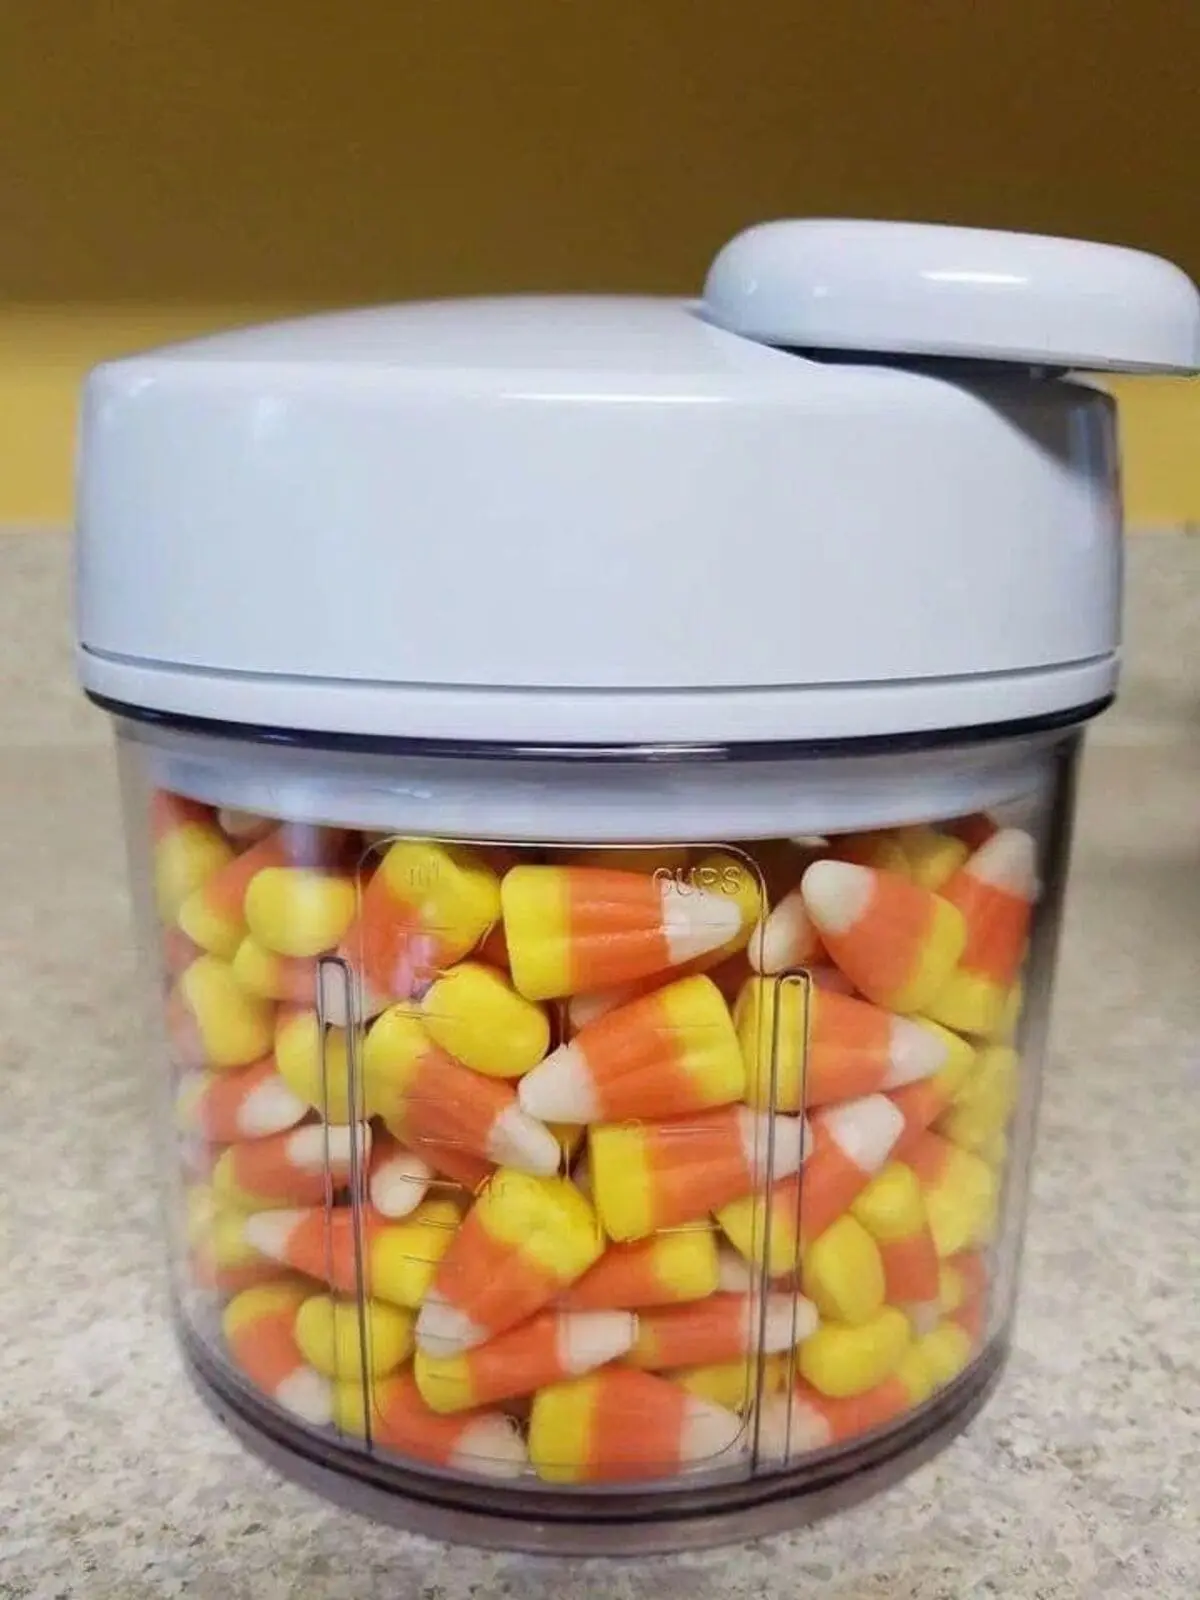 how many candy corns in the manual food processor